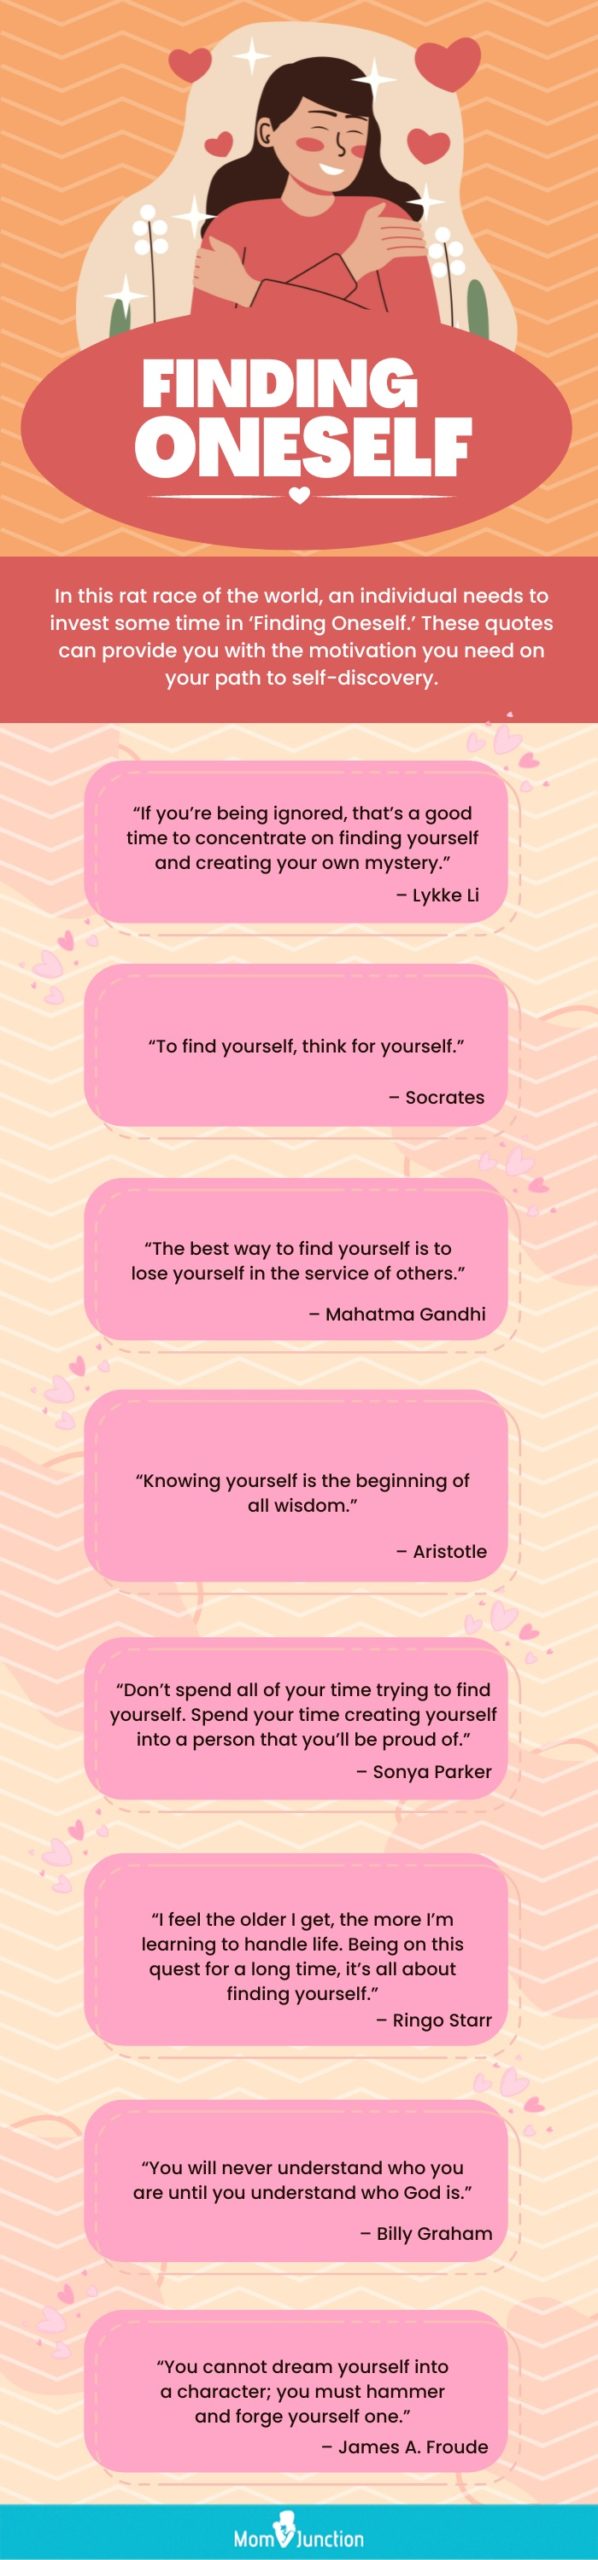 quotes on self-discovery [infographic]